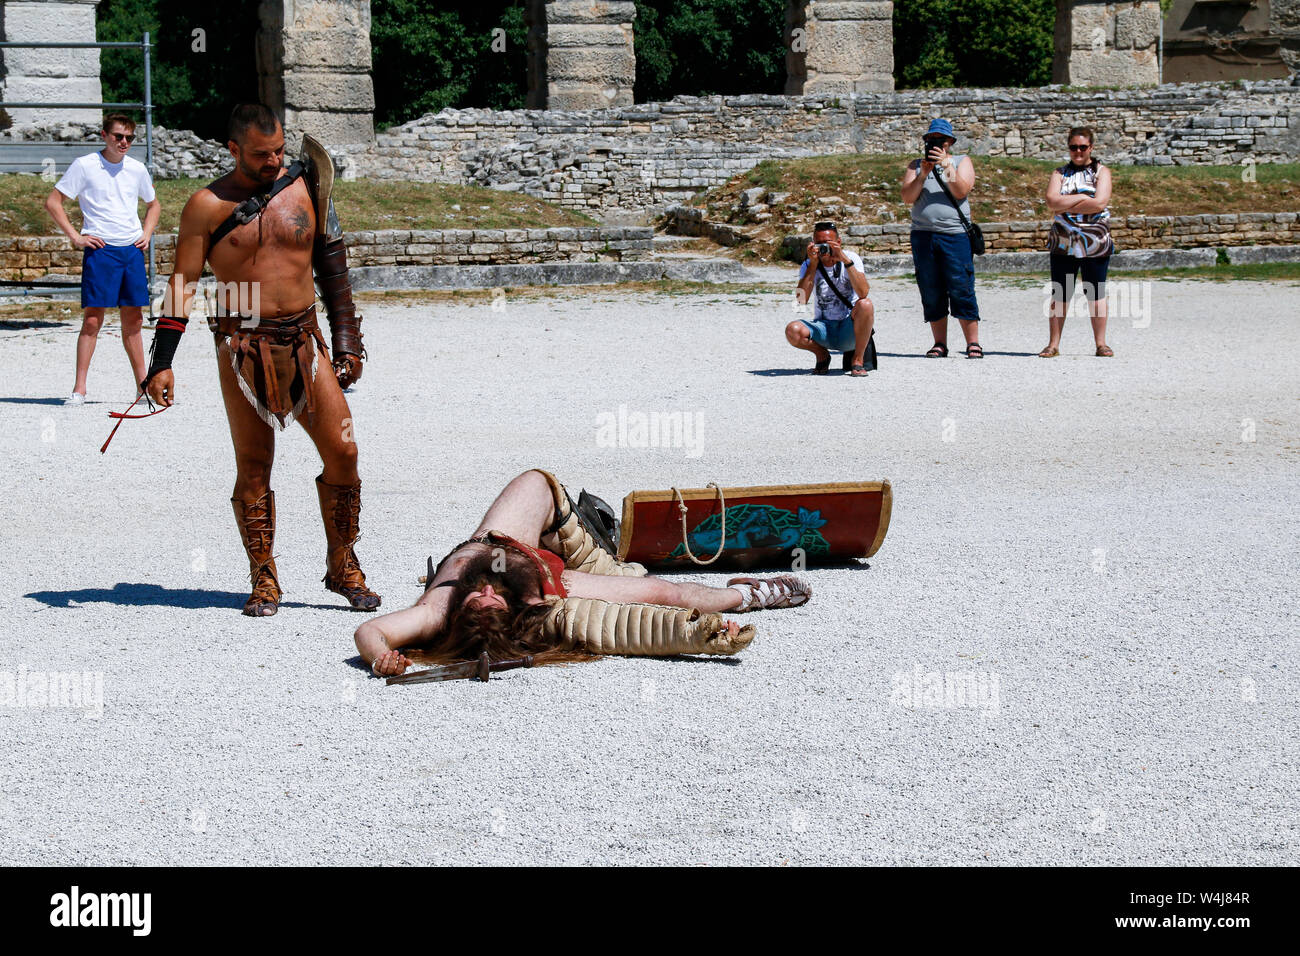 Tourists watch as actors stage gladiator battle in Pula Arena, a Roman amphitheatre built in Croatia in the 1st century AD Stock Photo